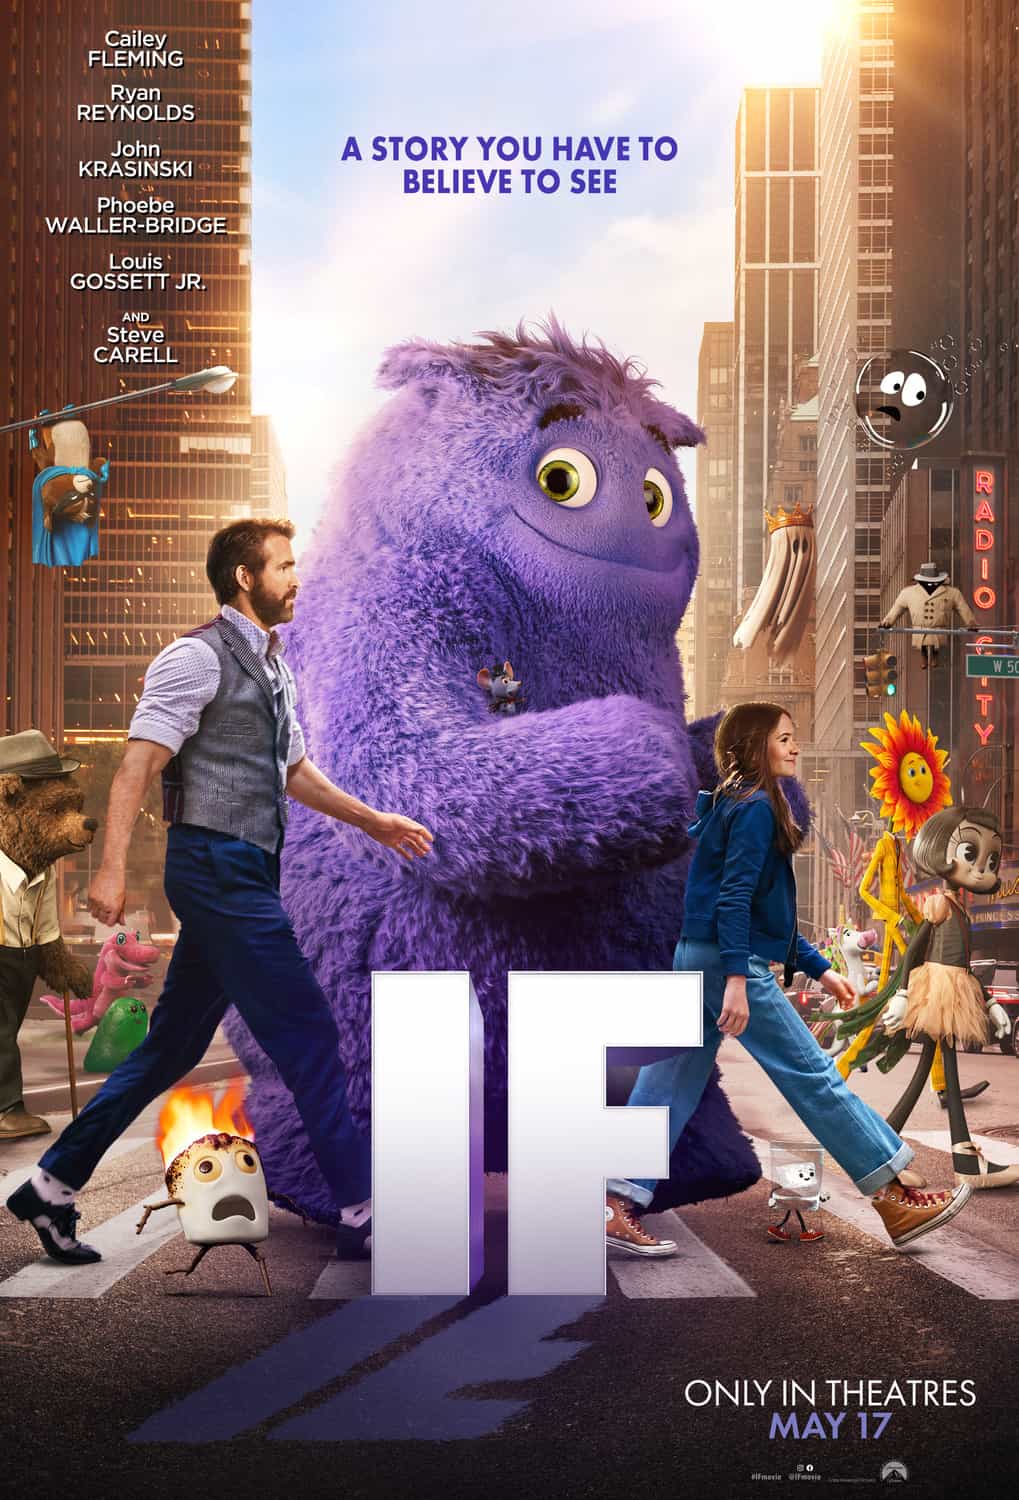 Check out the new trailer and poster for upcoming movie IF which stars Ryan Reynolds and Steve Carell - movie UK release date 24th May 2024 #if